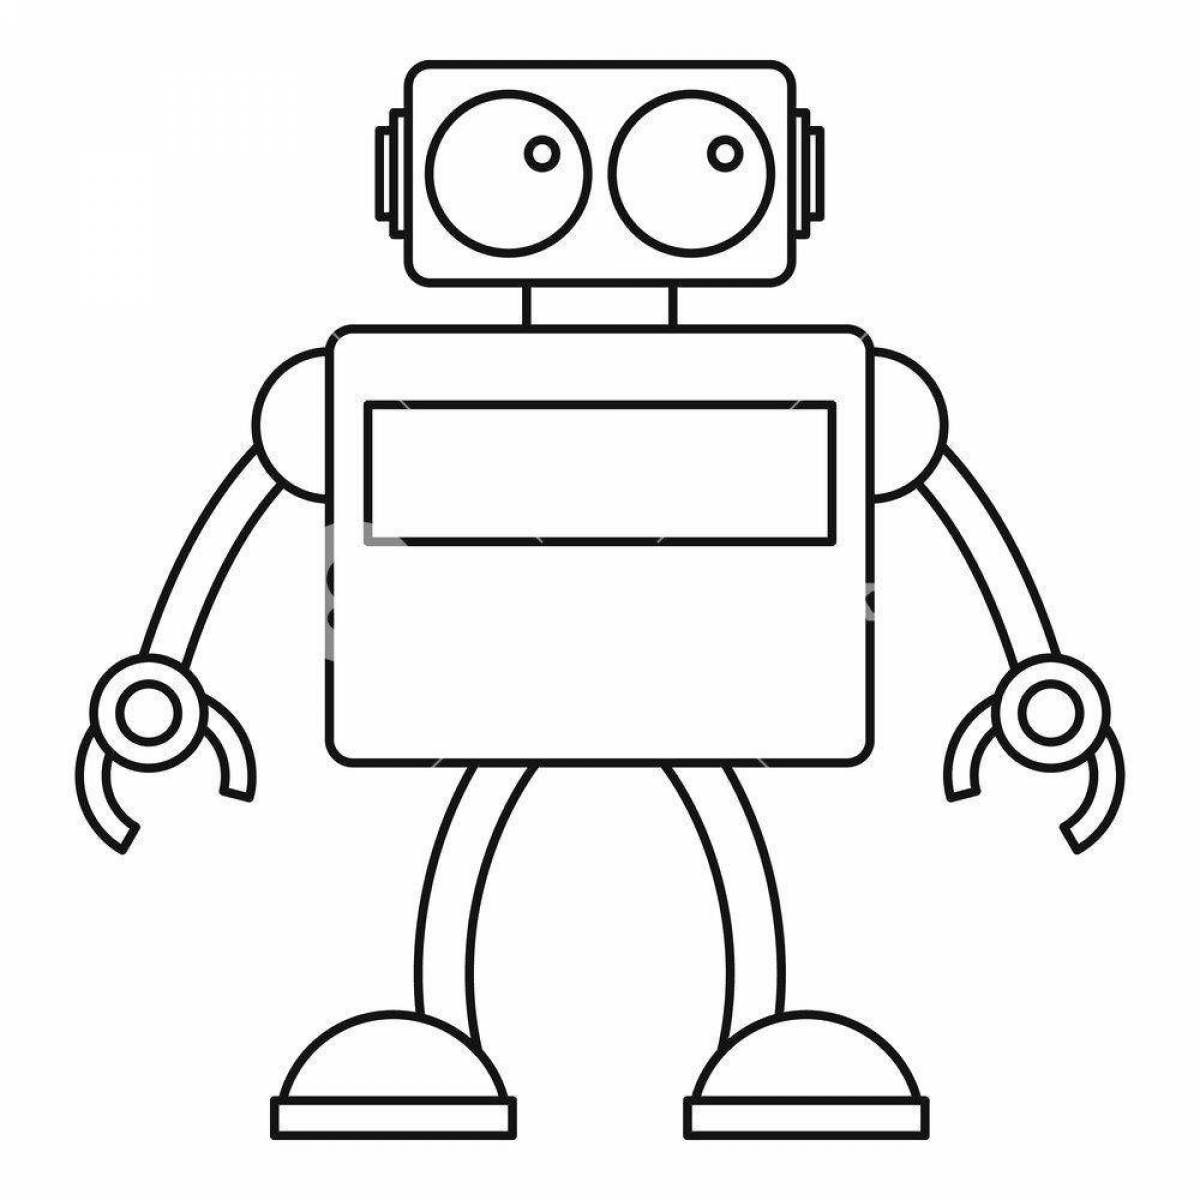 Fun paper robot coloring page